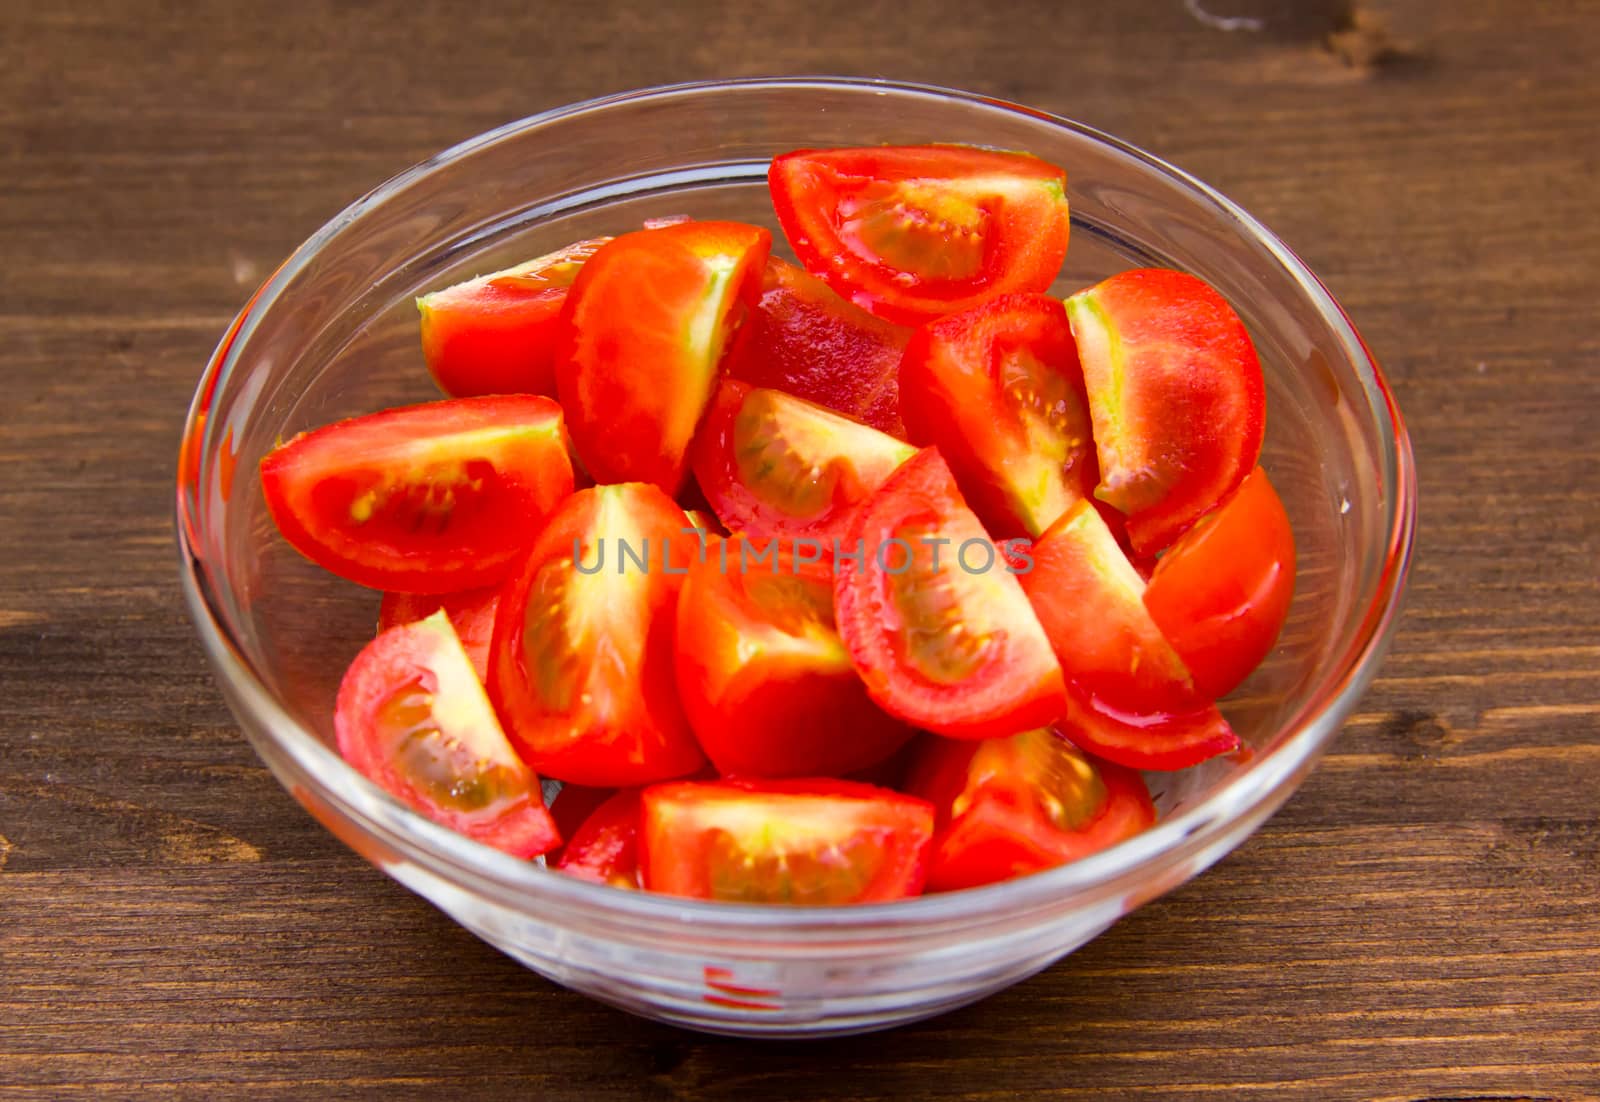 Wedges of tomato bowl on wooden table